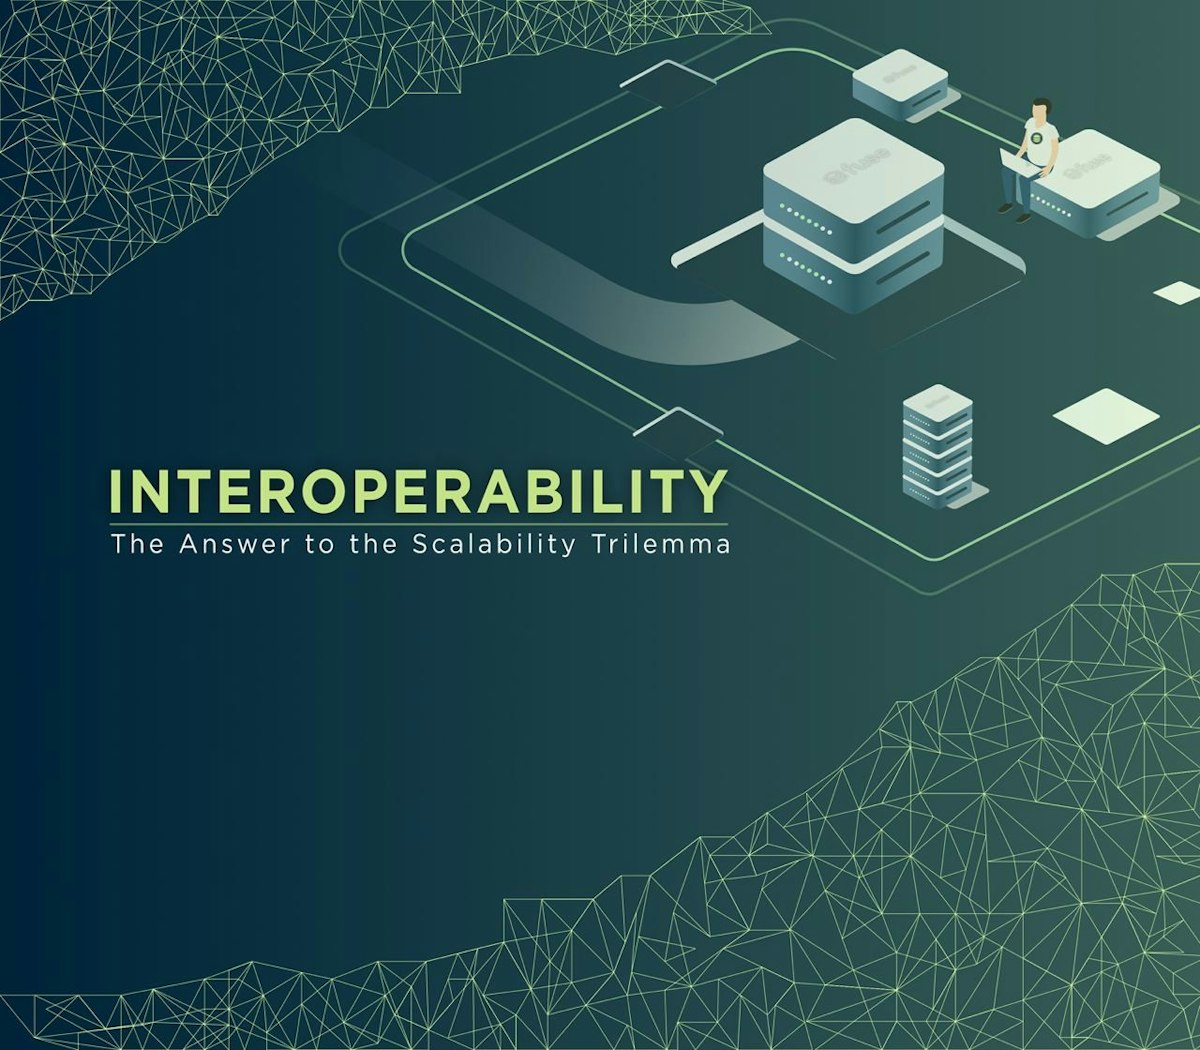 featured image - Interoperability: The Answer to the Scalability Trilemma